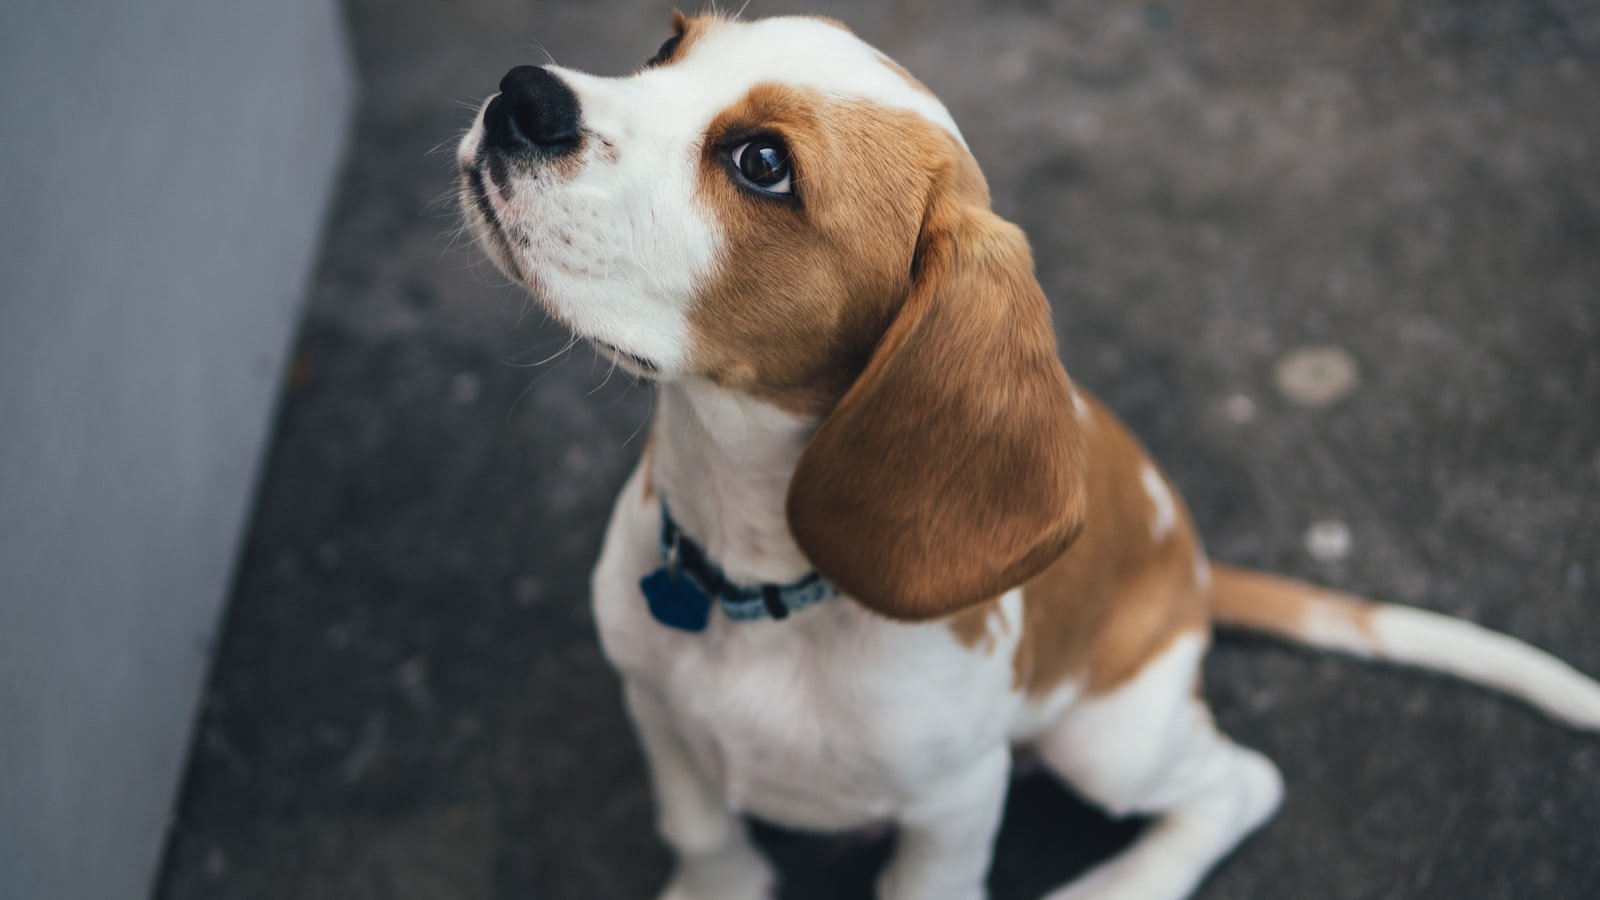 Puppy Obedience Classes: Are They Worth It?